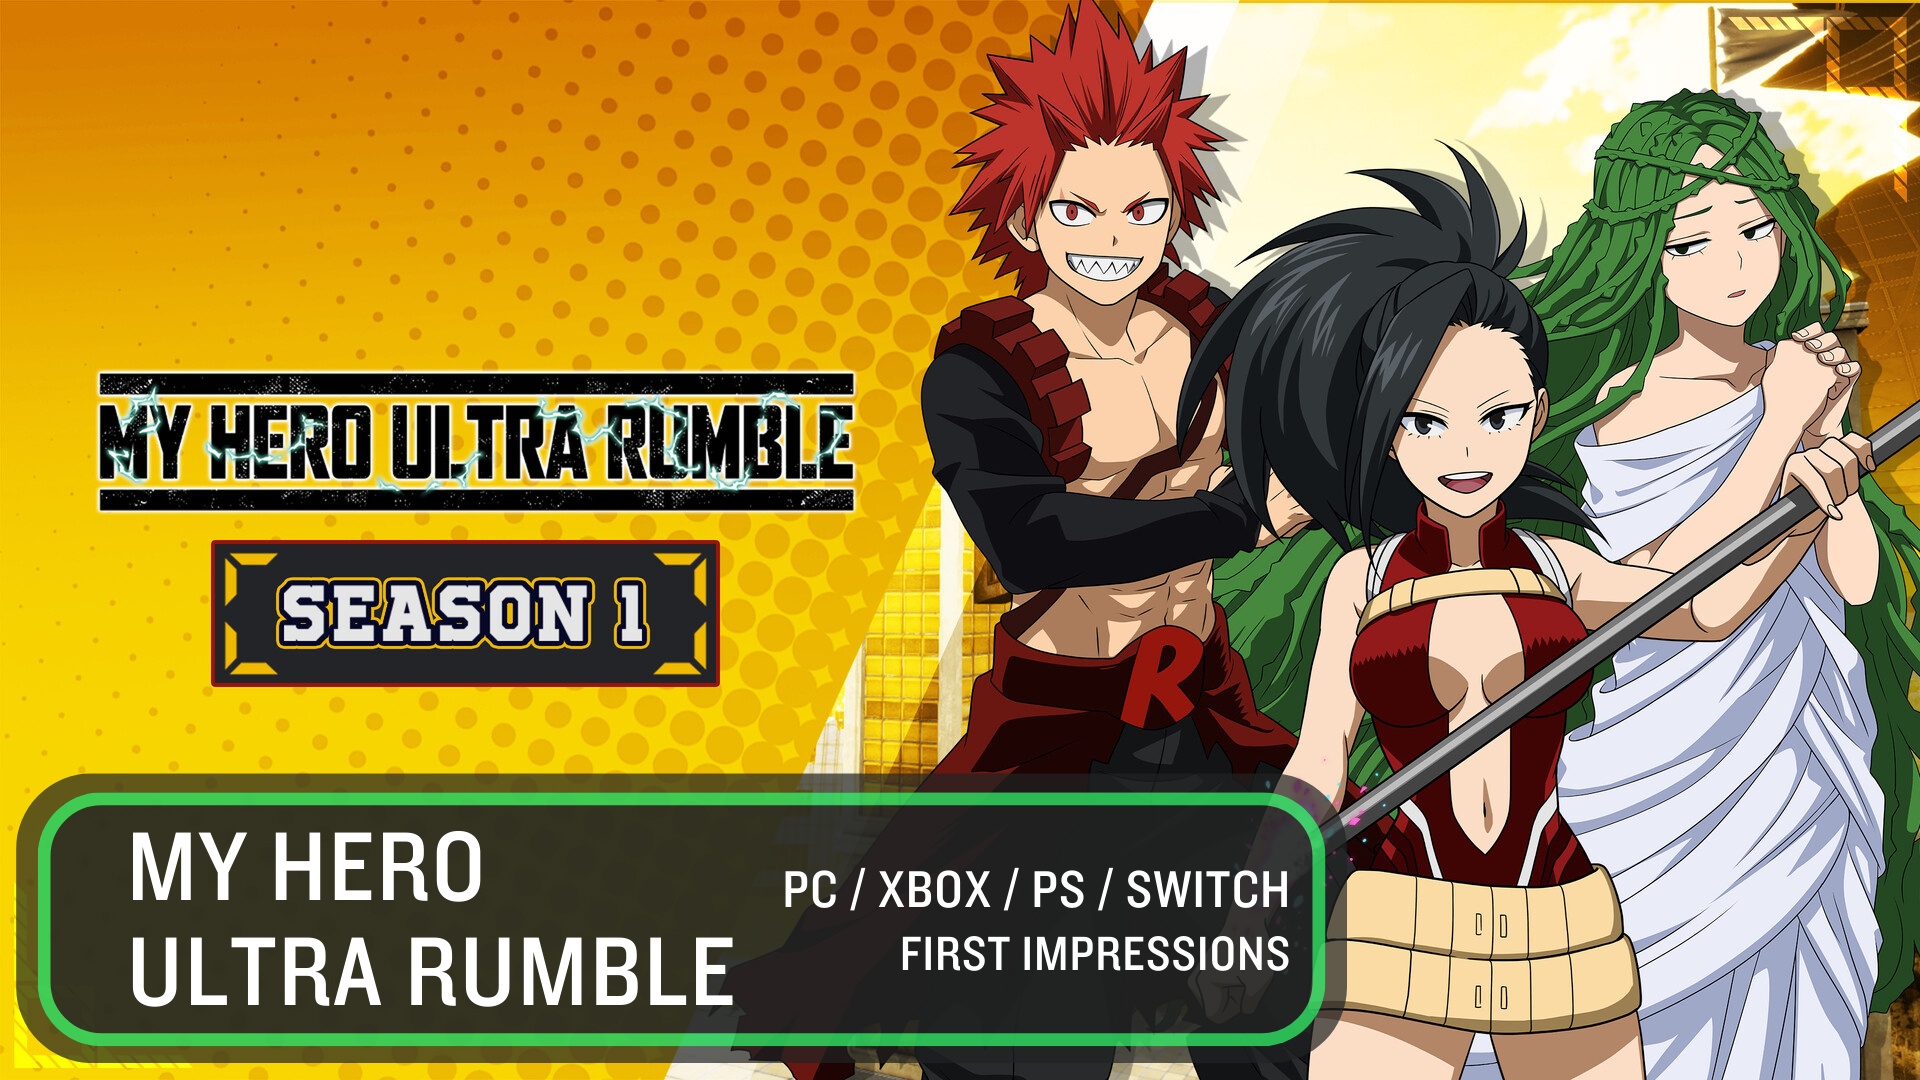 Is The My Hero Ultra Rumble Starter Pack Worth It?